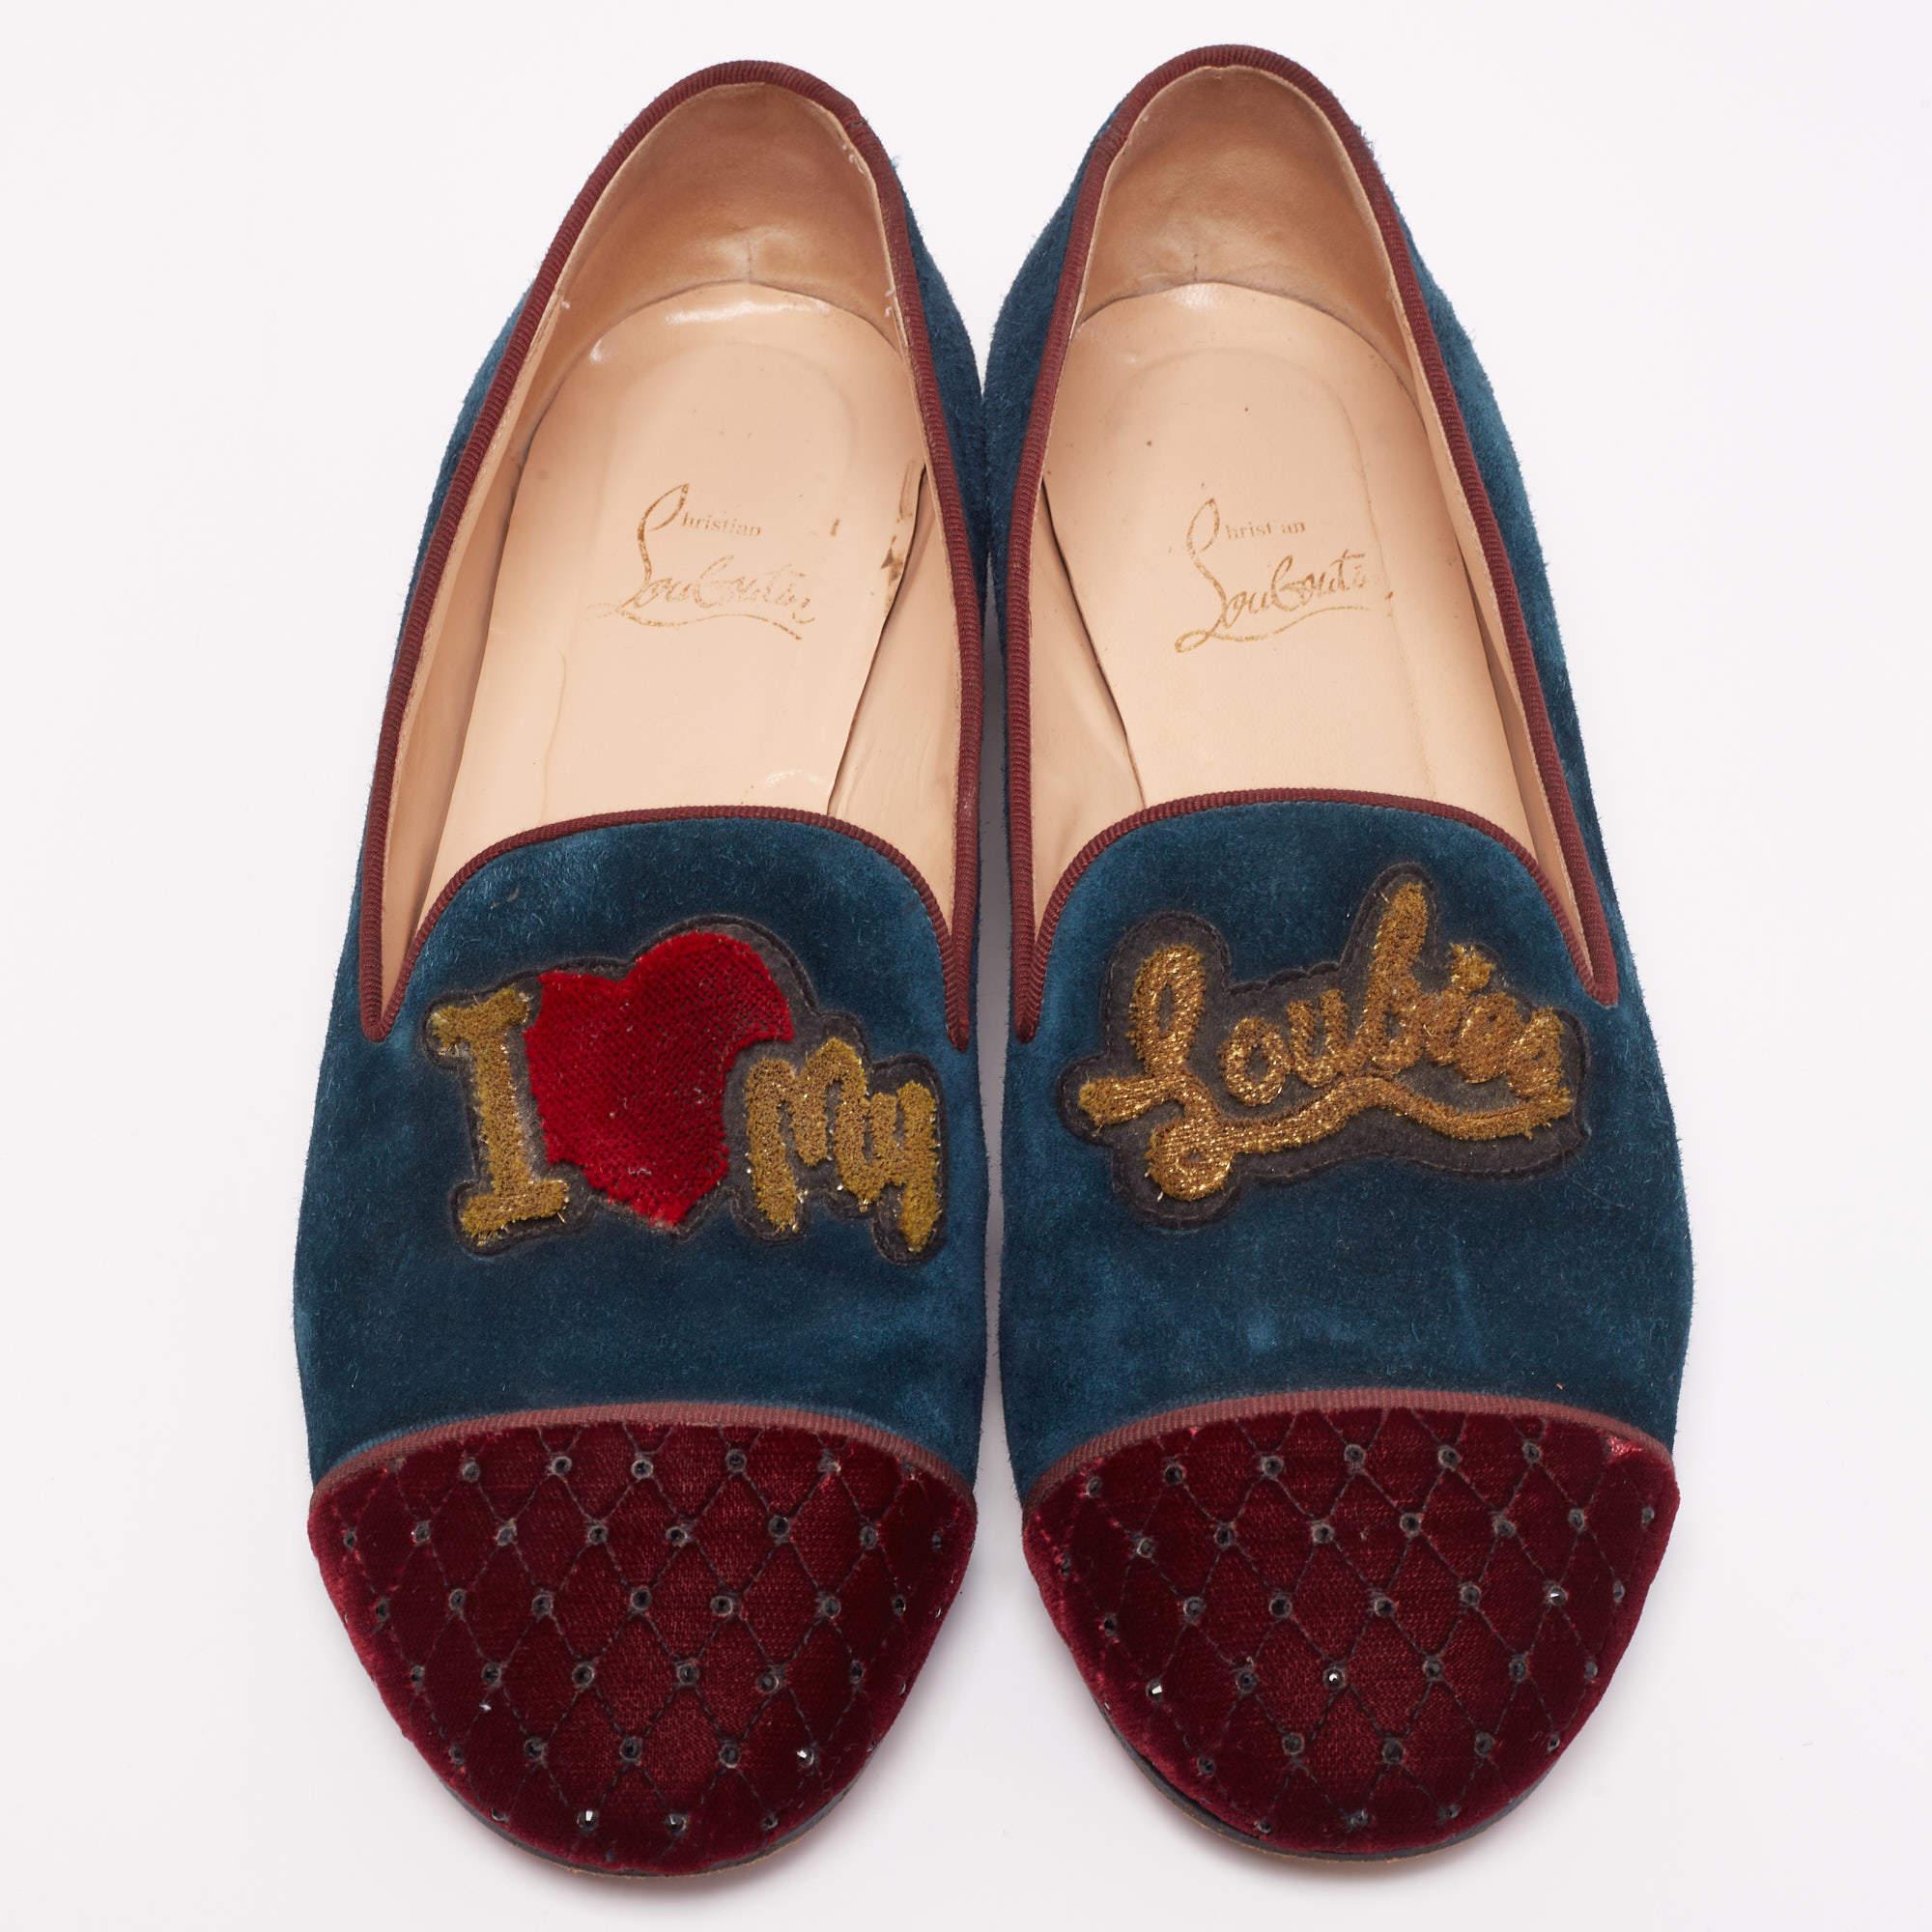 Move in style and comfort with this pair of loafers by Christian Louboutin. The shoes have been crafted from suede and velvet into a round-toe silhouette and highlighted with embellishments on the uppers.

